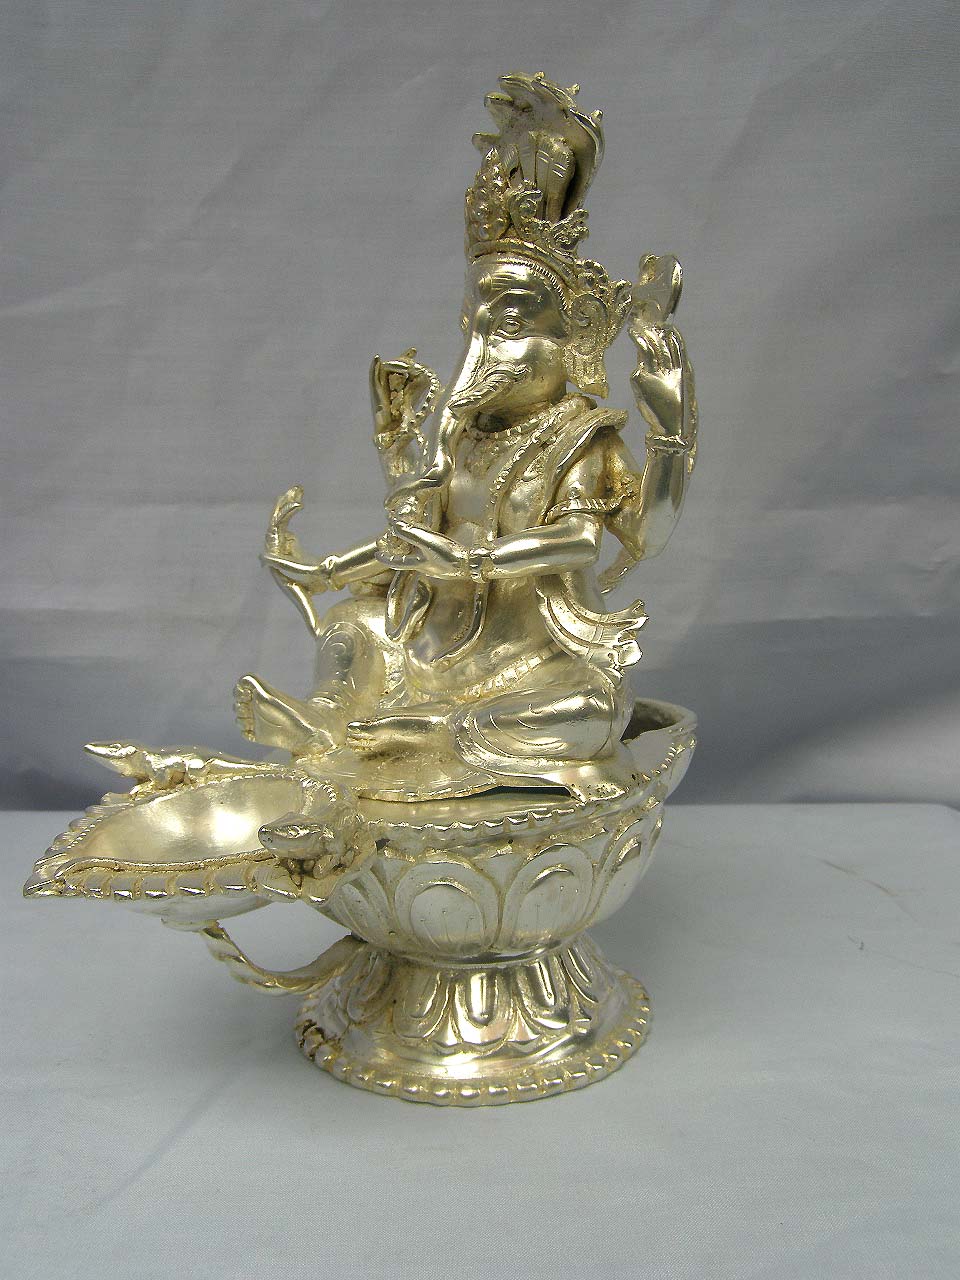 Ganesh Sukunda oil Lamp, silver Plated, old Post, remakable